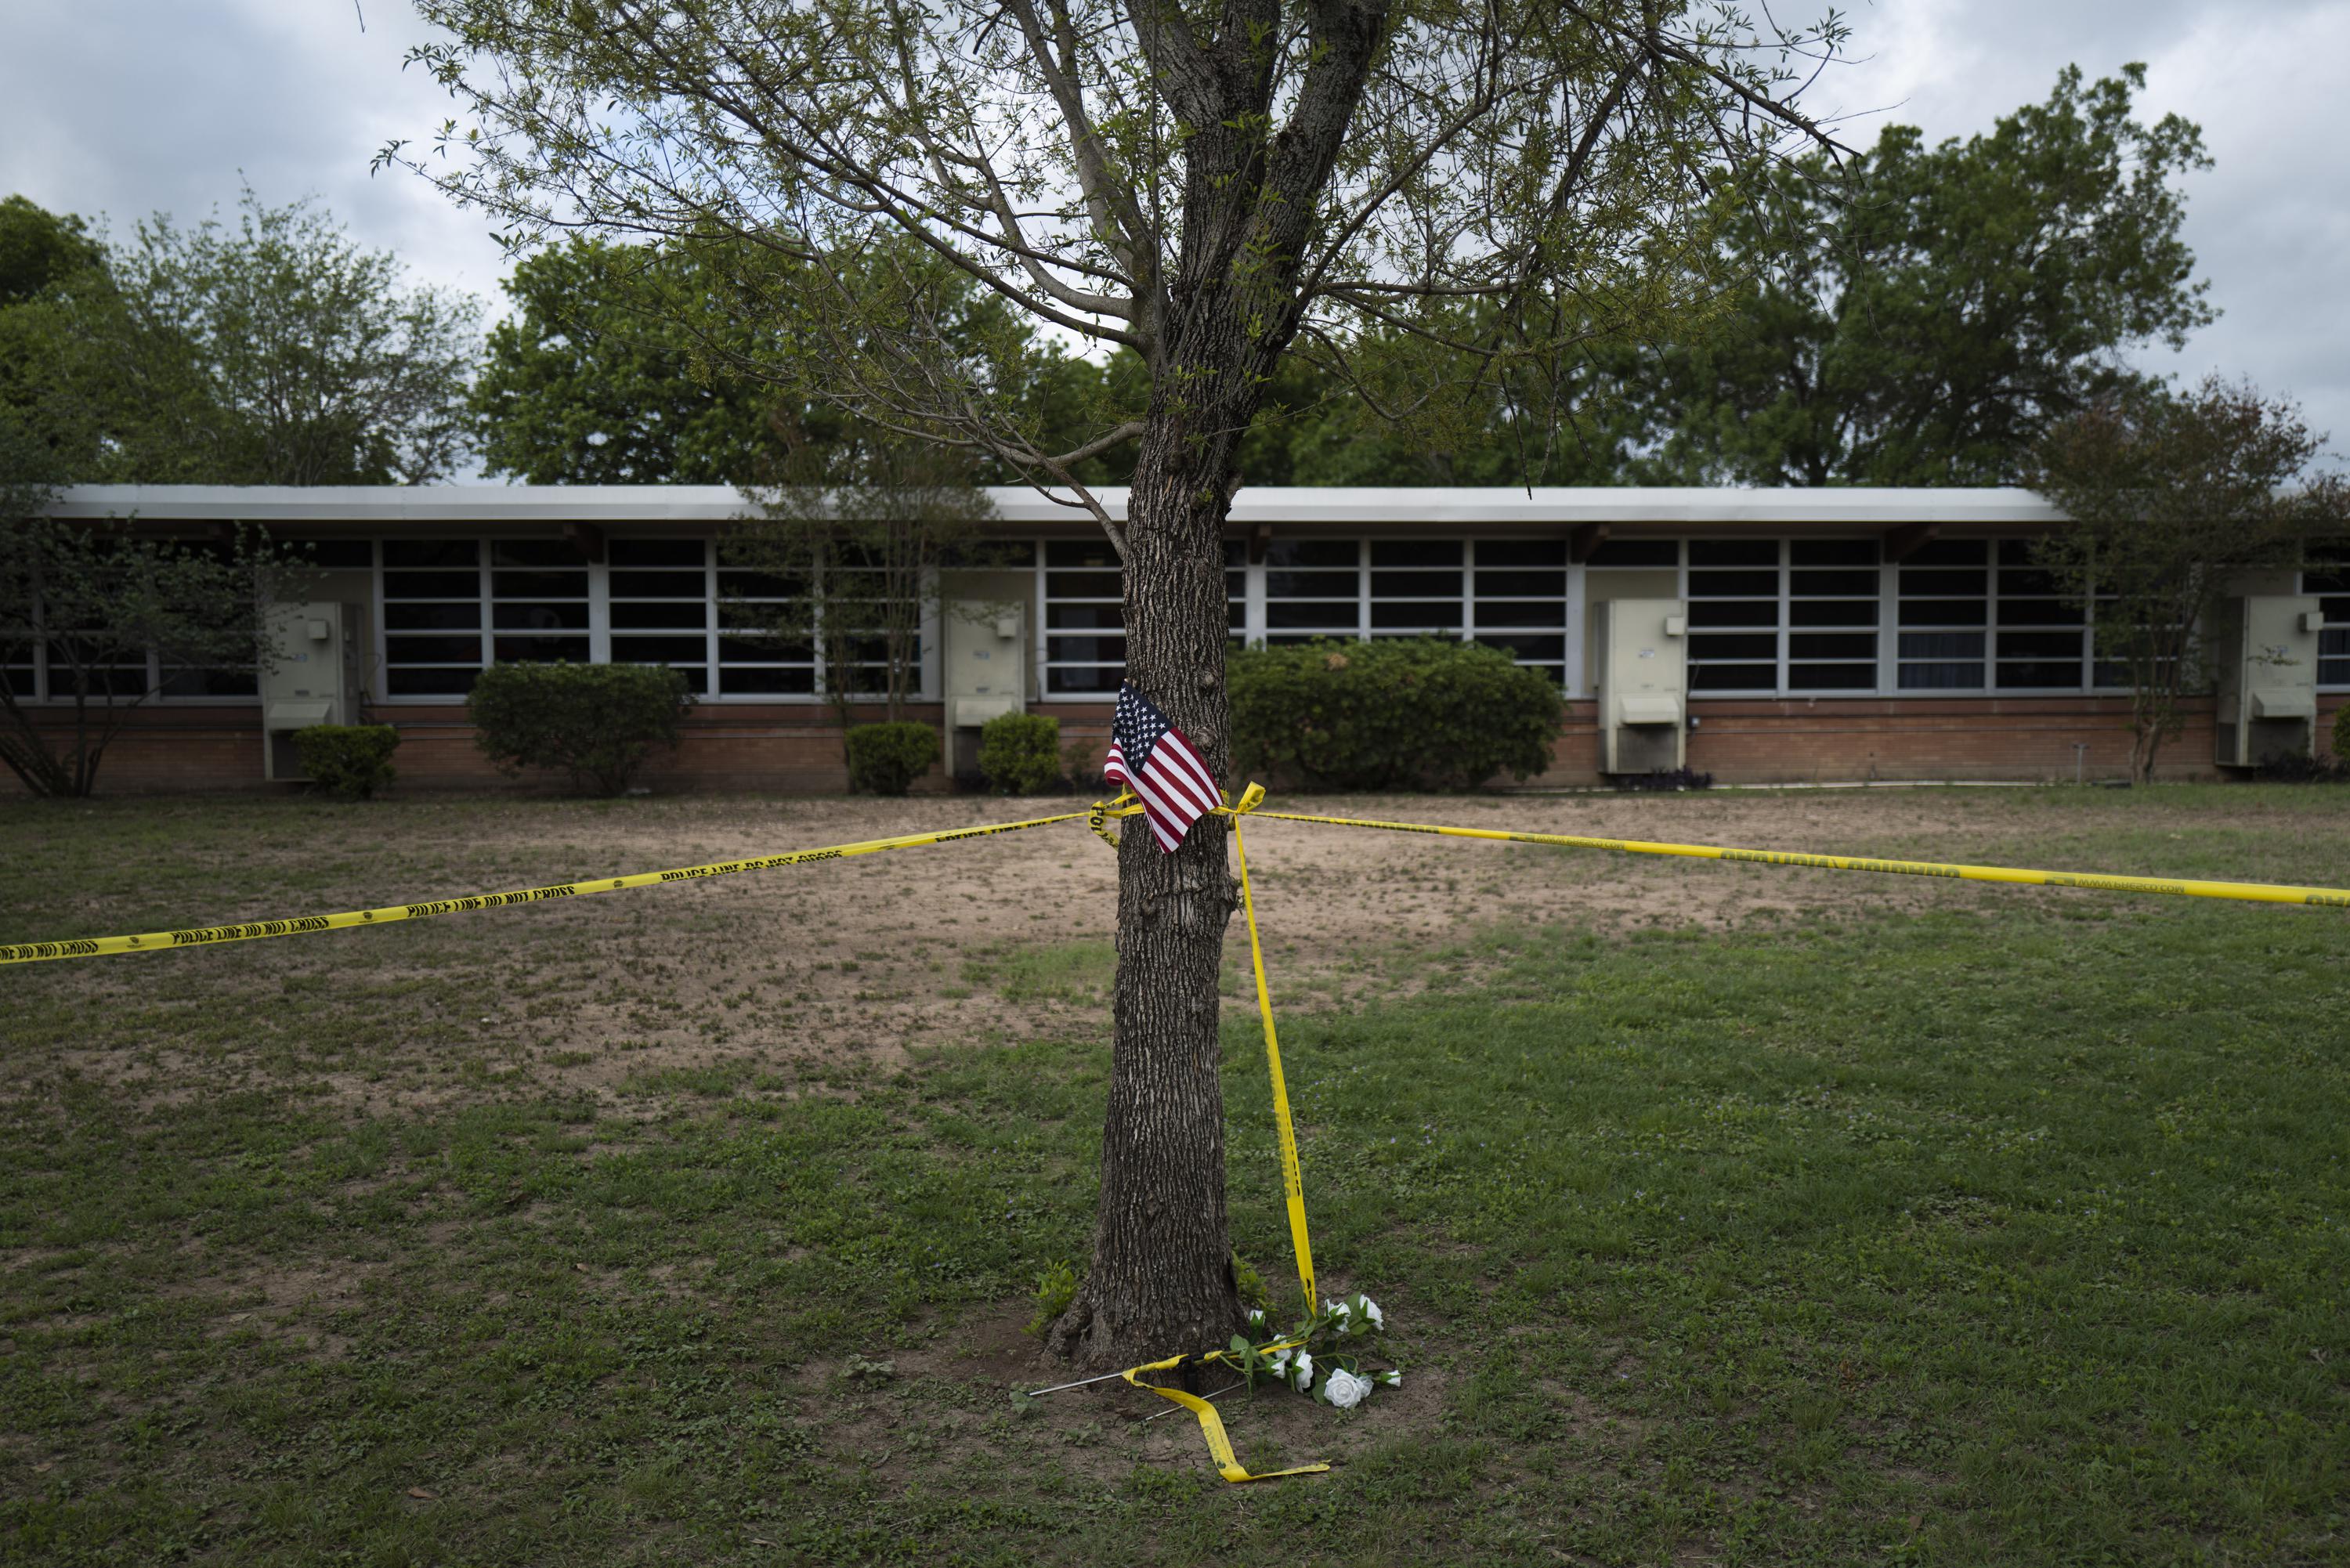 Teachers after Texas attack: ‘None of us are built for this'